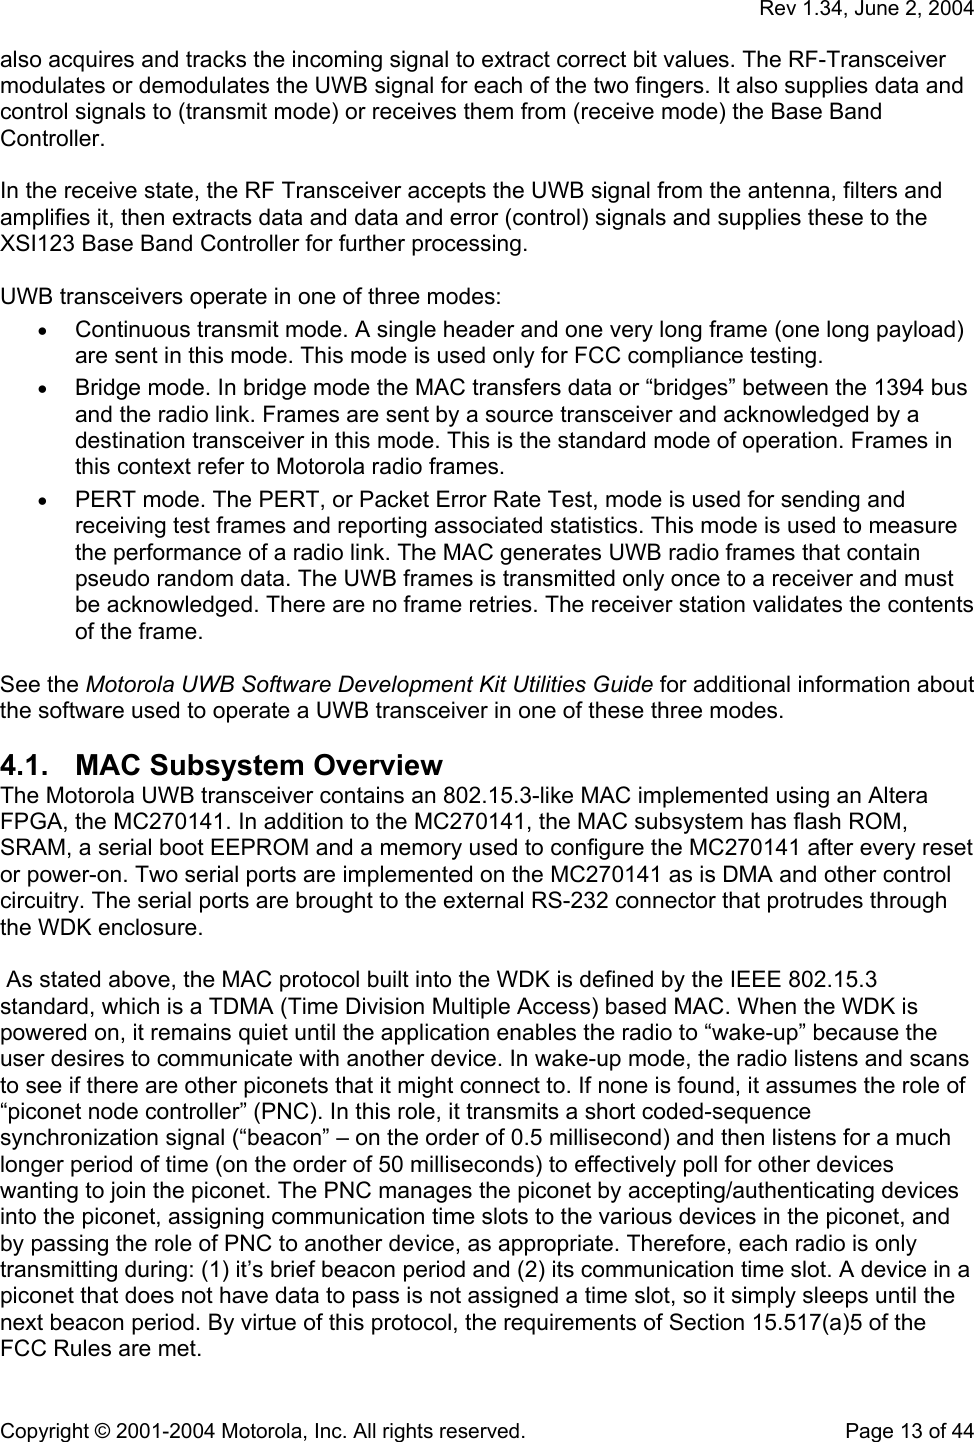   Rev 1.34, June 2, 2004  Copyright © 2001-2004 Motorola, Inc. All rights reserved.    Page 13 of 44 also acquires and tracks the incoming signal to extract correct bit values. The RF-Transceiver modulates or demodulates the UWB signal for each of the two fingers. It also supplies data and control signals to (transmit mode) or receives them from (receive mode) the Base Band Controller.  In the receive state, the RF Transceiver accepts the UWB signal from the antenna, filters and amplifies it, then extracts data and data and error (control) signals and supplies these to the XSI123 Base Band Controller for further processing.  UWB transceivers operate in one of three modes:  • Continuous transmit mode. A single header and one very long frame (one long payload) are sent in this mode. This mode is used only for FCC compliance testing. • Bridge mode. In bridge mode the MAC transfers data or “bridges” between the 1394 bus and the radio link. Frames are sent by a source transceiver and acknowledged by a destination transceiver in this mode. This is the standard mode of operation. Frames in this context refer to Motorola radio frames. • PERT mode. The PERT, or Packet Error Rate Test, mode is used for sending and receiving test frames and reporting associated statistics. This mode is used to measure the performance of a radio link. The MAC generates UWB radio frames that contain pseudo random data. The UWB frames is transmitted only once to a receiver and must be acknowledged. There are no frame retries. The receiver station validates the contents of the frame.  See the Motorola UWB Software Development Kit Utilities Guide for additional information about the software used to operate a UWB transceiver in one of these three modes. 4.1.  MAC Subsystem Overview The Motorola UWB transceiver contains an 802.15.3-like MAC implemented using an Altera FPGA, the MC270141. In addition to the MC270141, the MAC subsystem has flash ROM, SRAM, a serial boot EEPROM and a memory used to configure the MC270141 after every reset or power-on. Two serial ports are implemented on the MC270141 as is DMA and other control circuitry. The serial ports are brought to the external RS-232 connector that protrudes through the WDK enclosure.   As stated above, the MAC protocol built into the WDK is defined by the IEEE 802.15.3 standard, which is a TDMA (Time Division Multiple Access) based MAC. When the WDK is powered on, it remains quiet until the application enables the radio to “wake-up” because the user desires to communicate with another device. In wake-up mode, the radio listens and scans to see if there are other piconets that it might connect to. If none is found, it assumes the role of “piconet node controller” (PNC). In this role, it transmits a short coded-sequence synchronization signal (“beacon” – on the order of 0.5 millisecond) and then listens for a much longer period of time (on the order of 50 milliseconds) to effectively poll for other devices wanting to join the piconet. The PNC manages the piconet by accepting/authenticating devices into the piconet, assigning communication time slots to the various devices in the piconet, and by passing the role of PNC to another device, as appropriate. Therefore, each radio is only transmitting during: (1) it’s brief beacon period and (2) its communication time slot. A device in a piconet that does not have data to pass is not assigned a time slot, so it simply sleeps until the next beacon period. By virtue of this protocol, the requirements of Section 15.517(a)5 of the FCC Rules are met. 